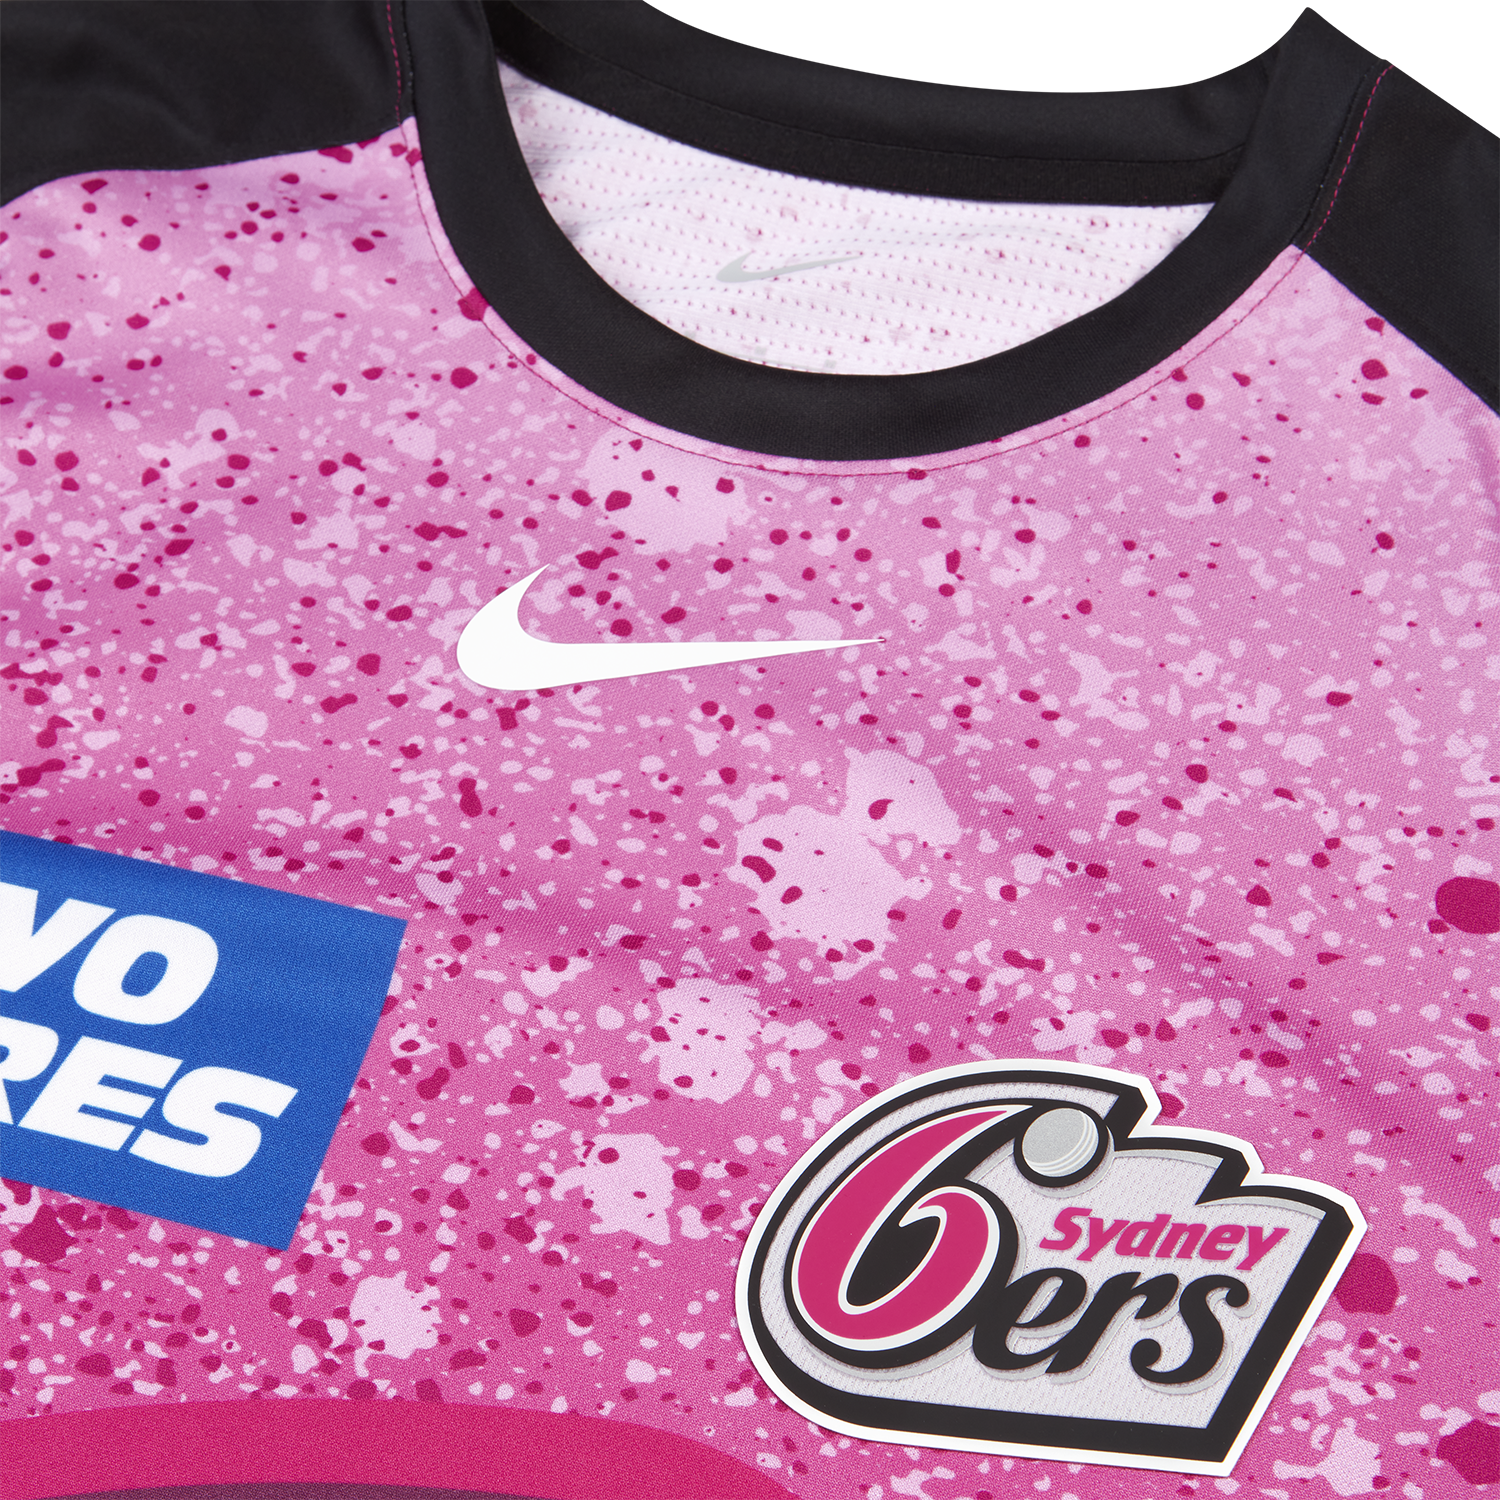 Sydney Sixers - 🏆 BBL, 10 Champions merchandise and